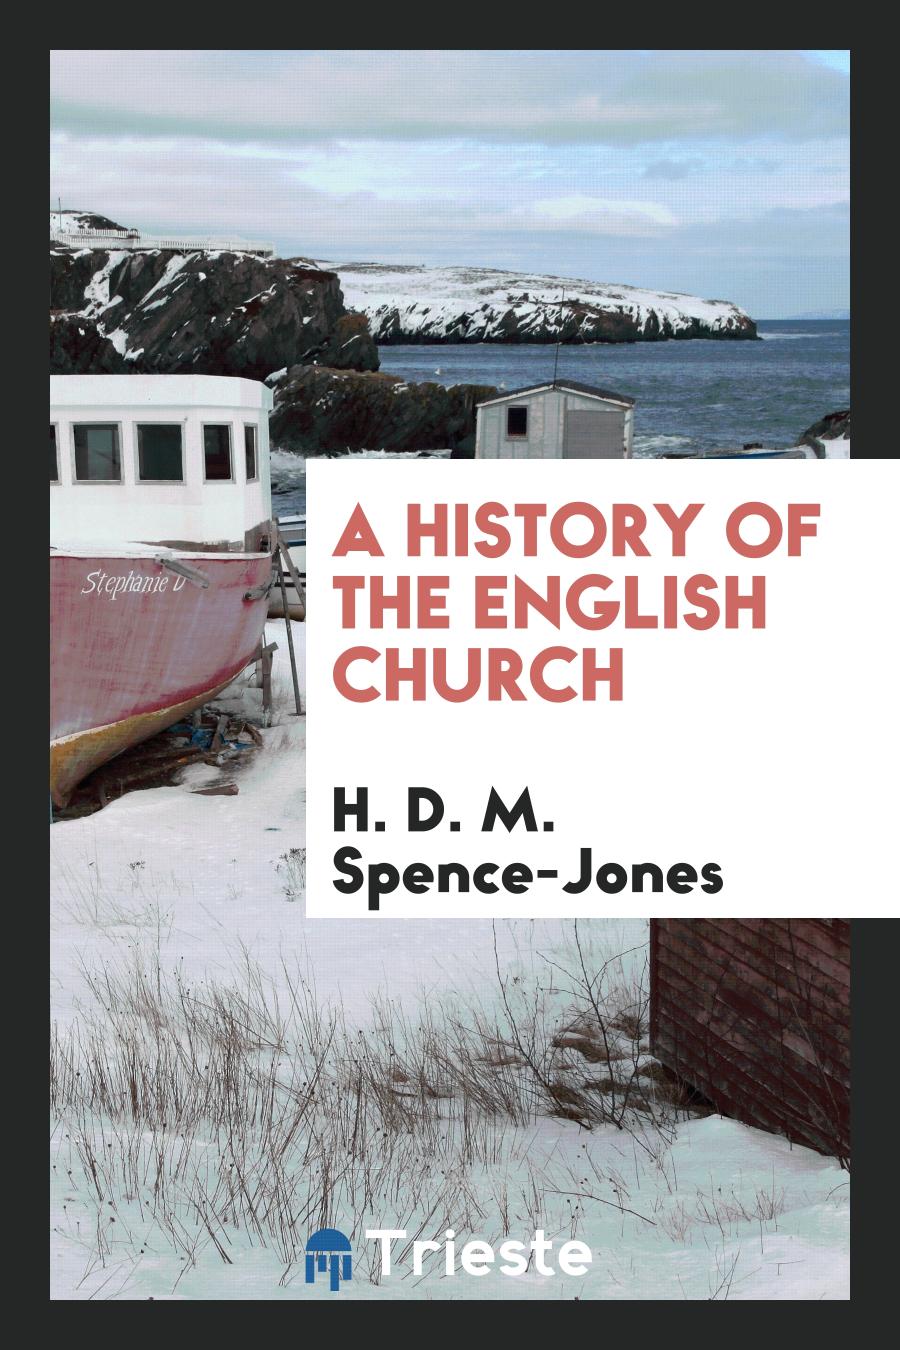 A history of the English Church